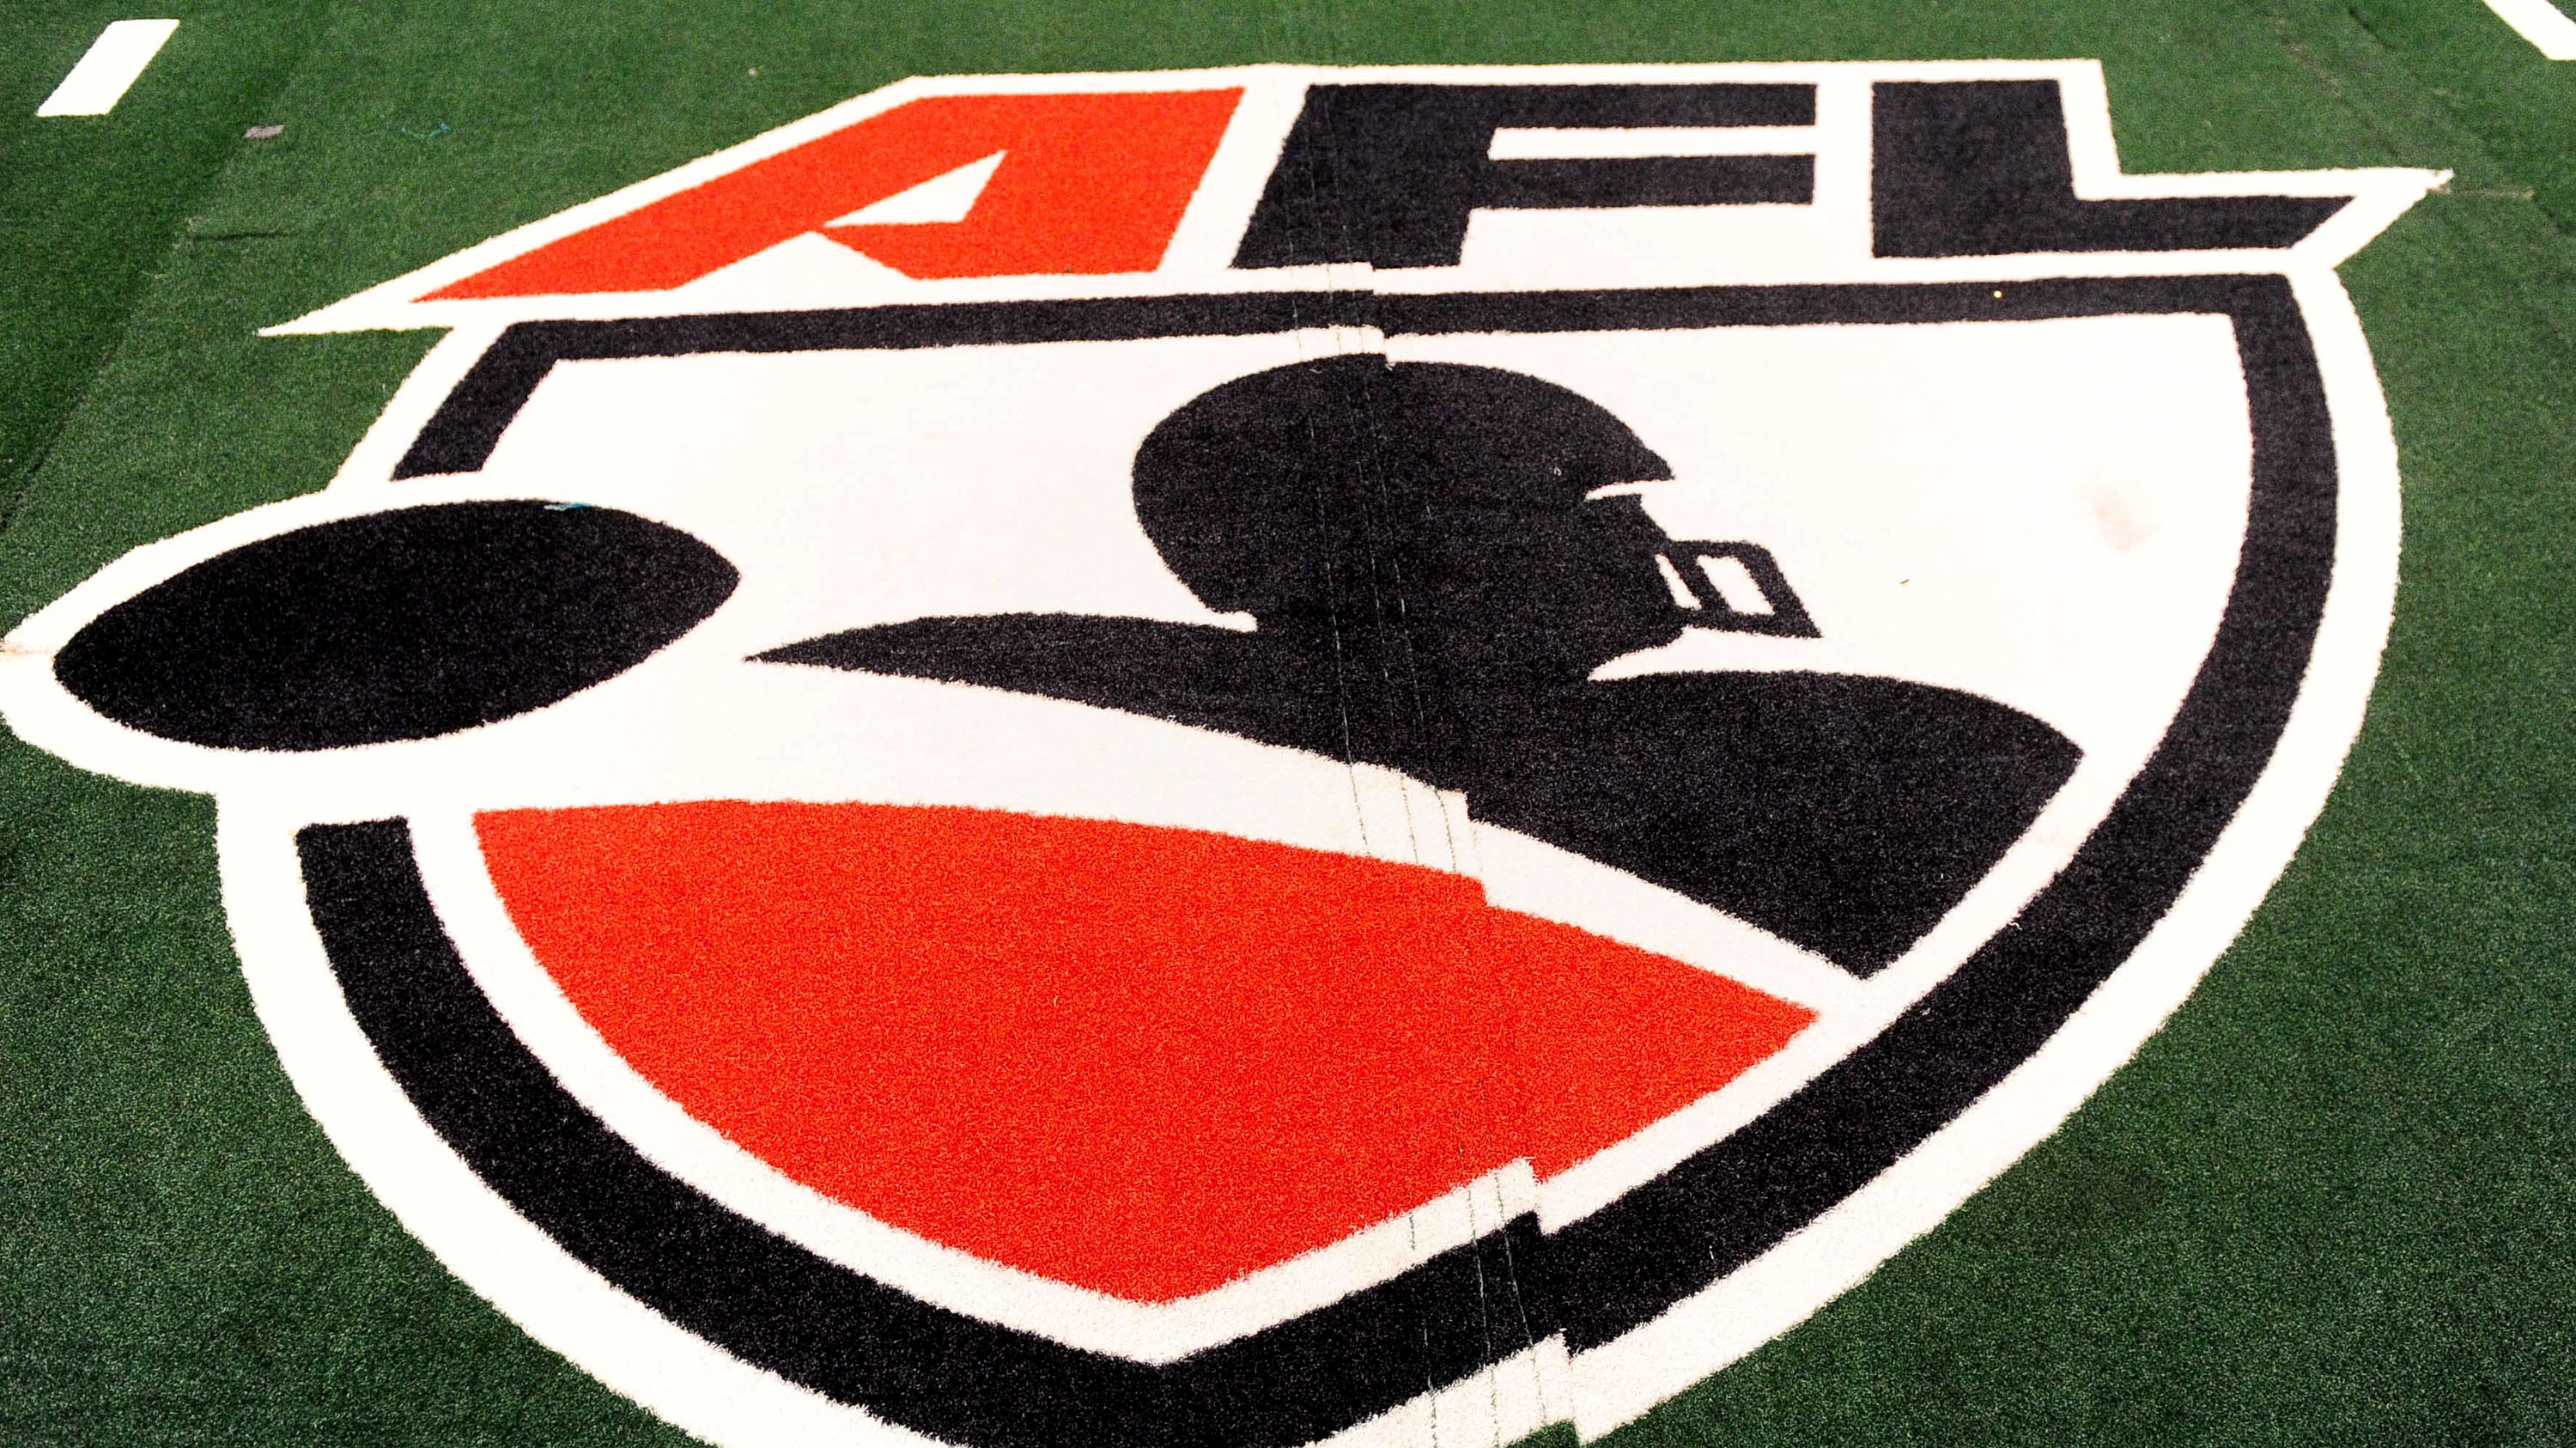 Arena Football League coming back to 16 cities in United States